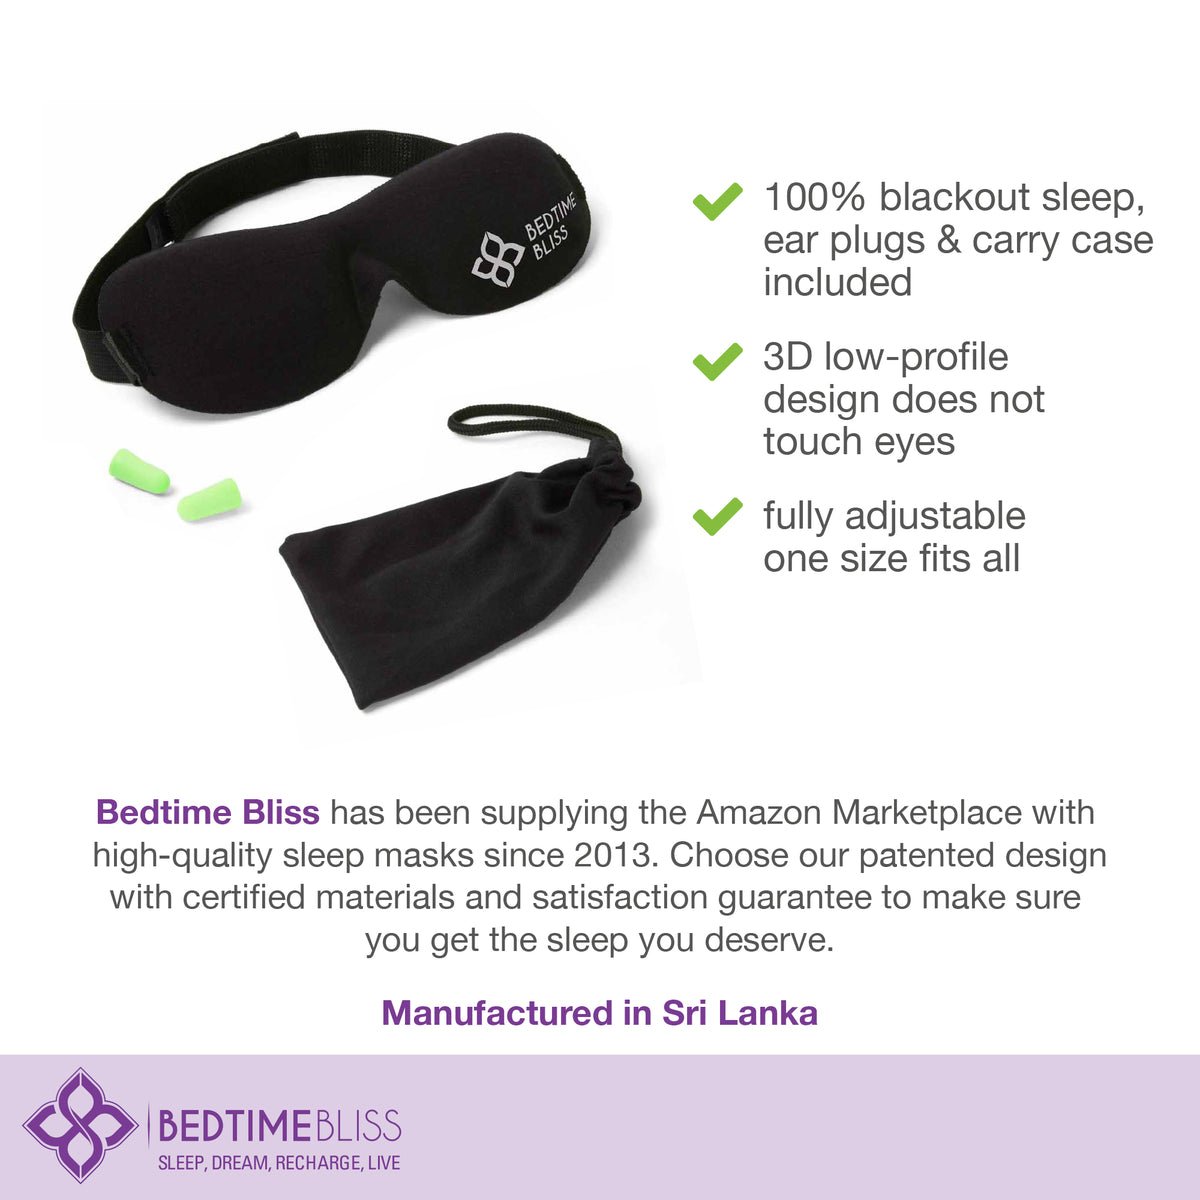 Eye Mask for Sleeping | Sleep Mask Men/Women Better Than Silk Our Luxury Blackout Contoured Eye Masks are Comfortable - This Sleeping mask Set Includes Carry Pouch and Ear Plugs